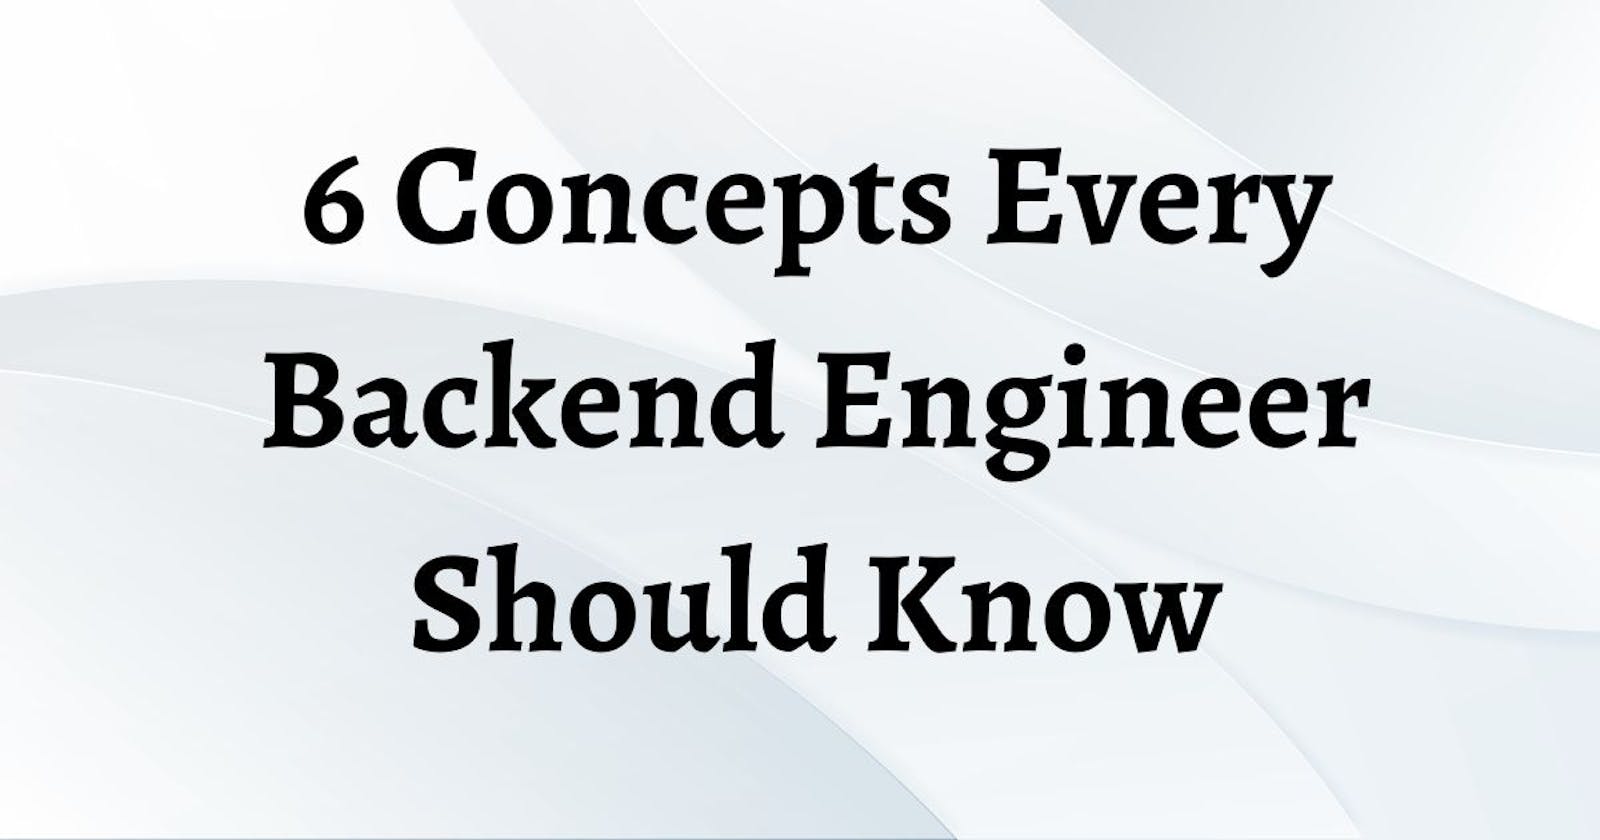 6 Concepts Every Backend Engineer Should Know